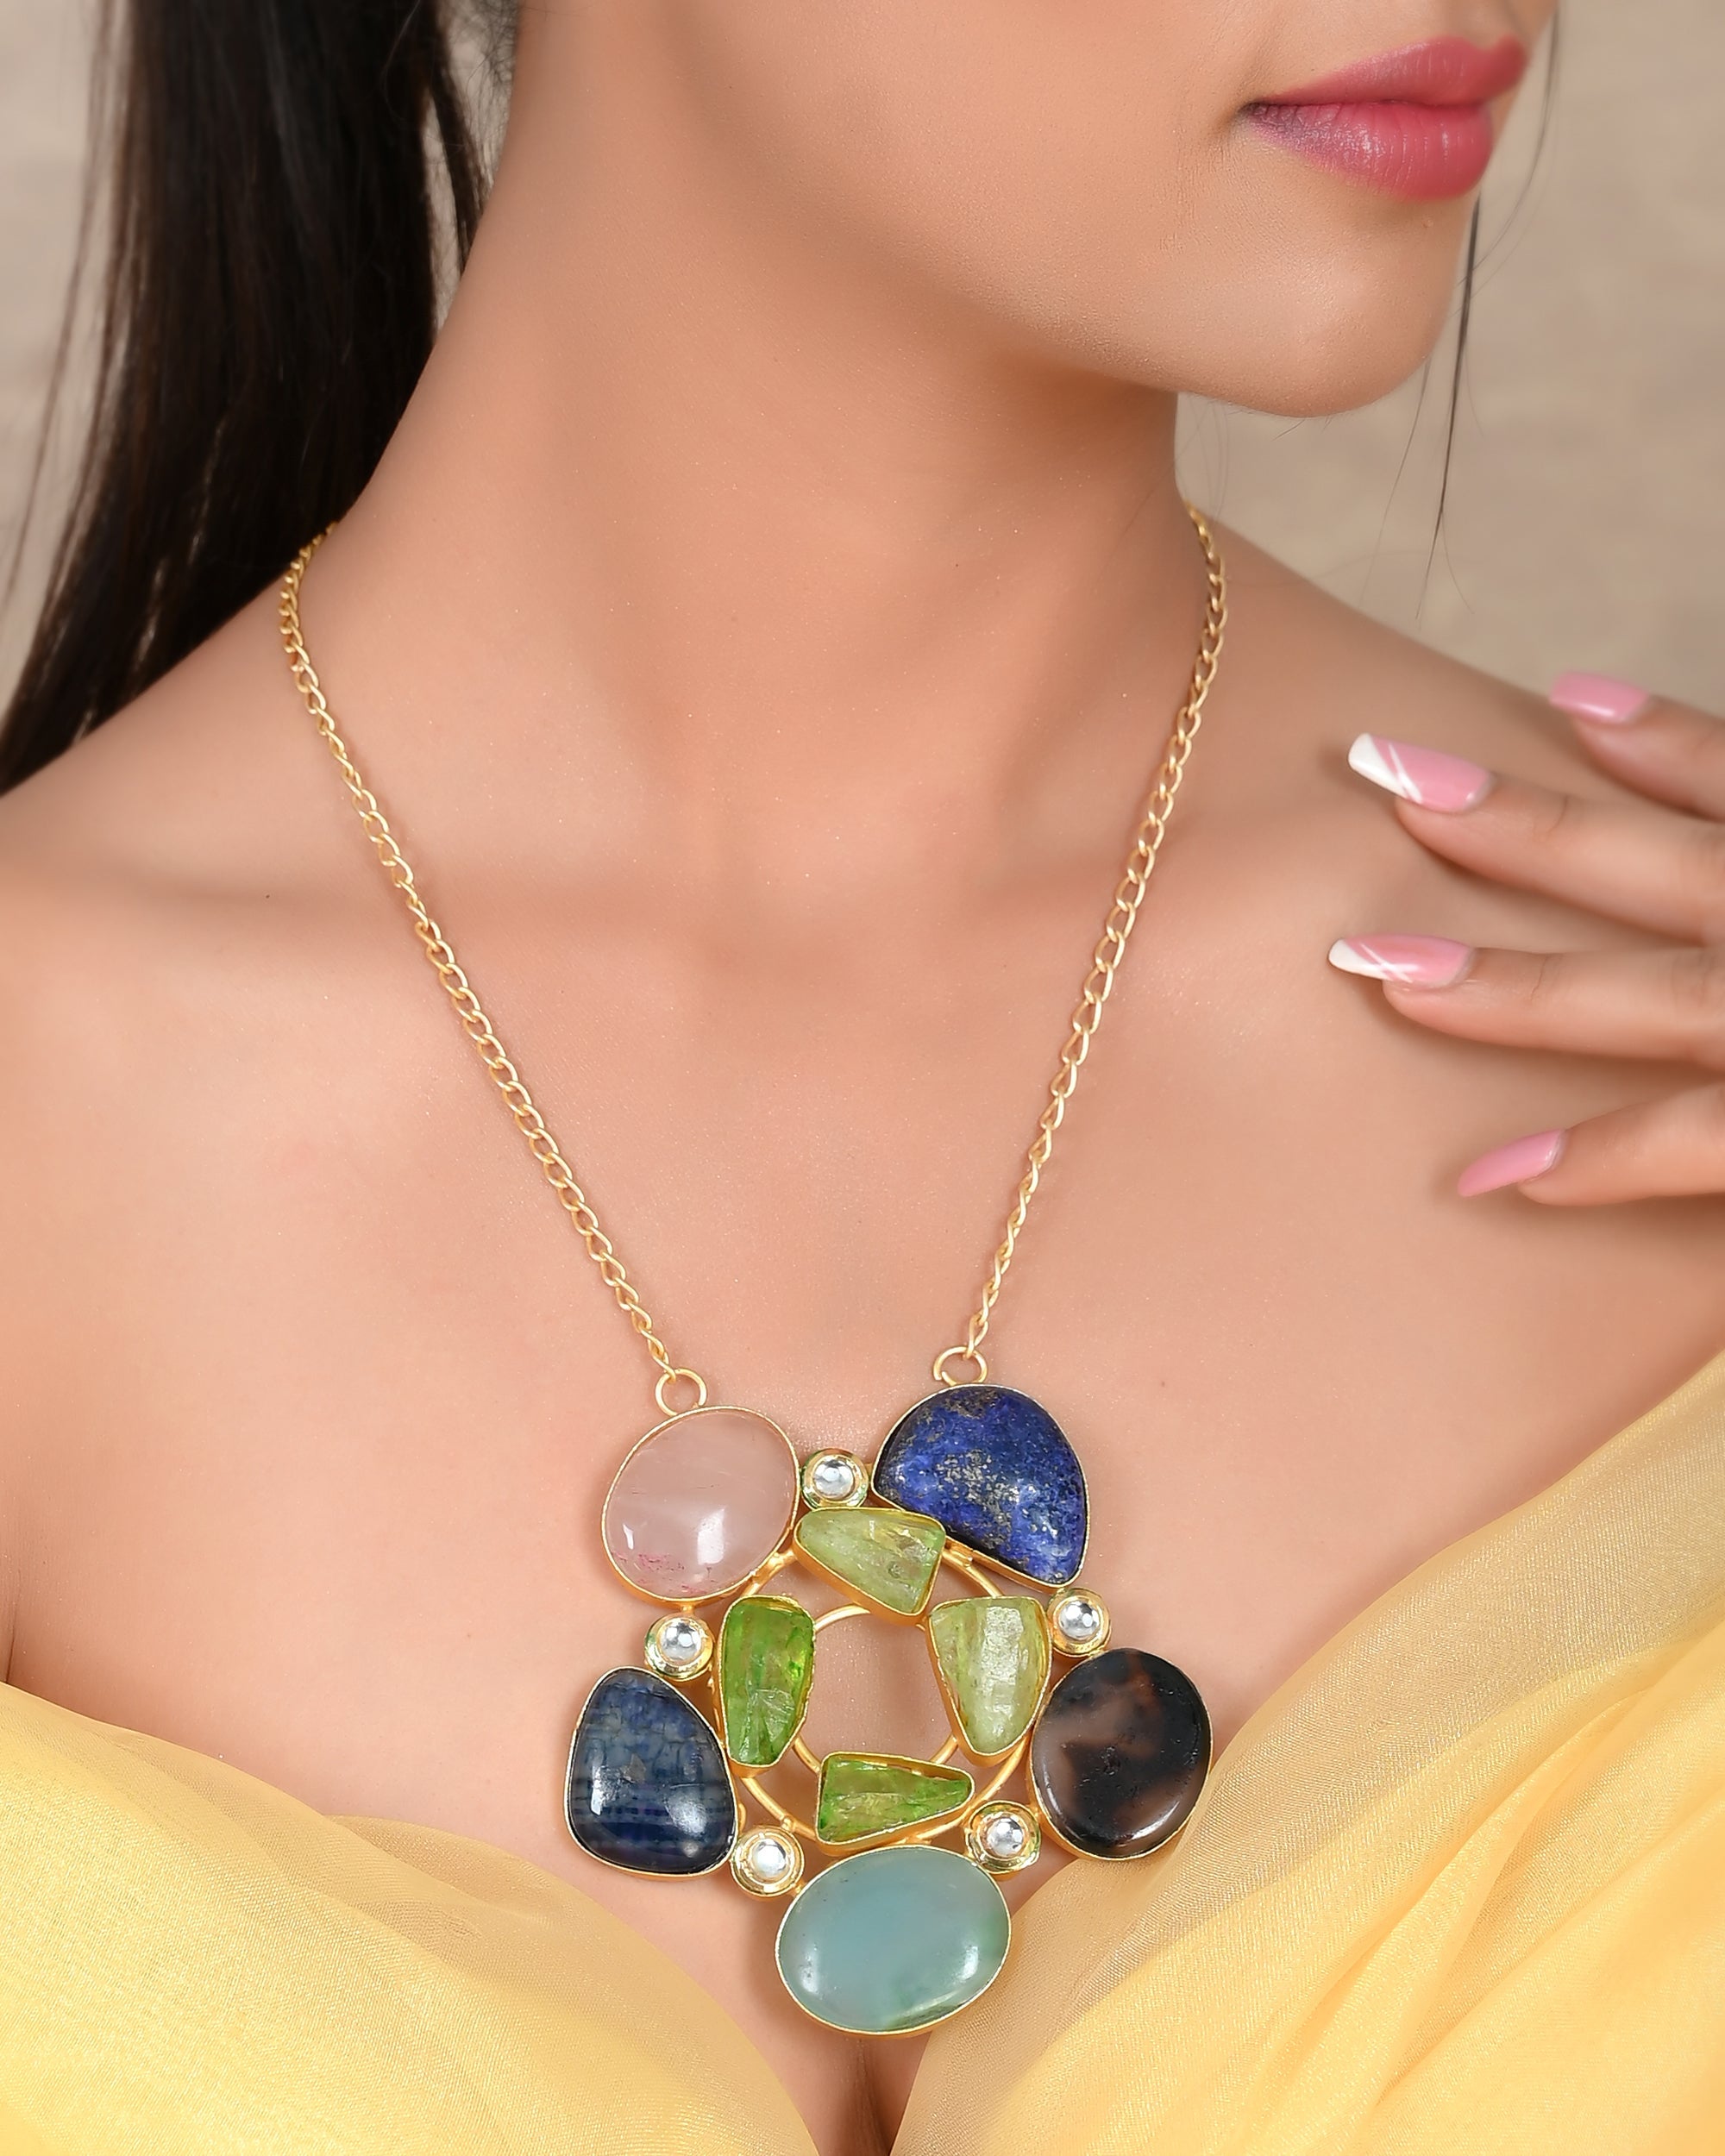 Laura Medine 18k Yellow Gold Moonstone Multi-colored Stone Necklace – Jay  Feder Jewelers